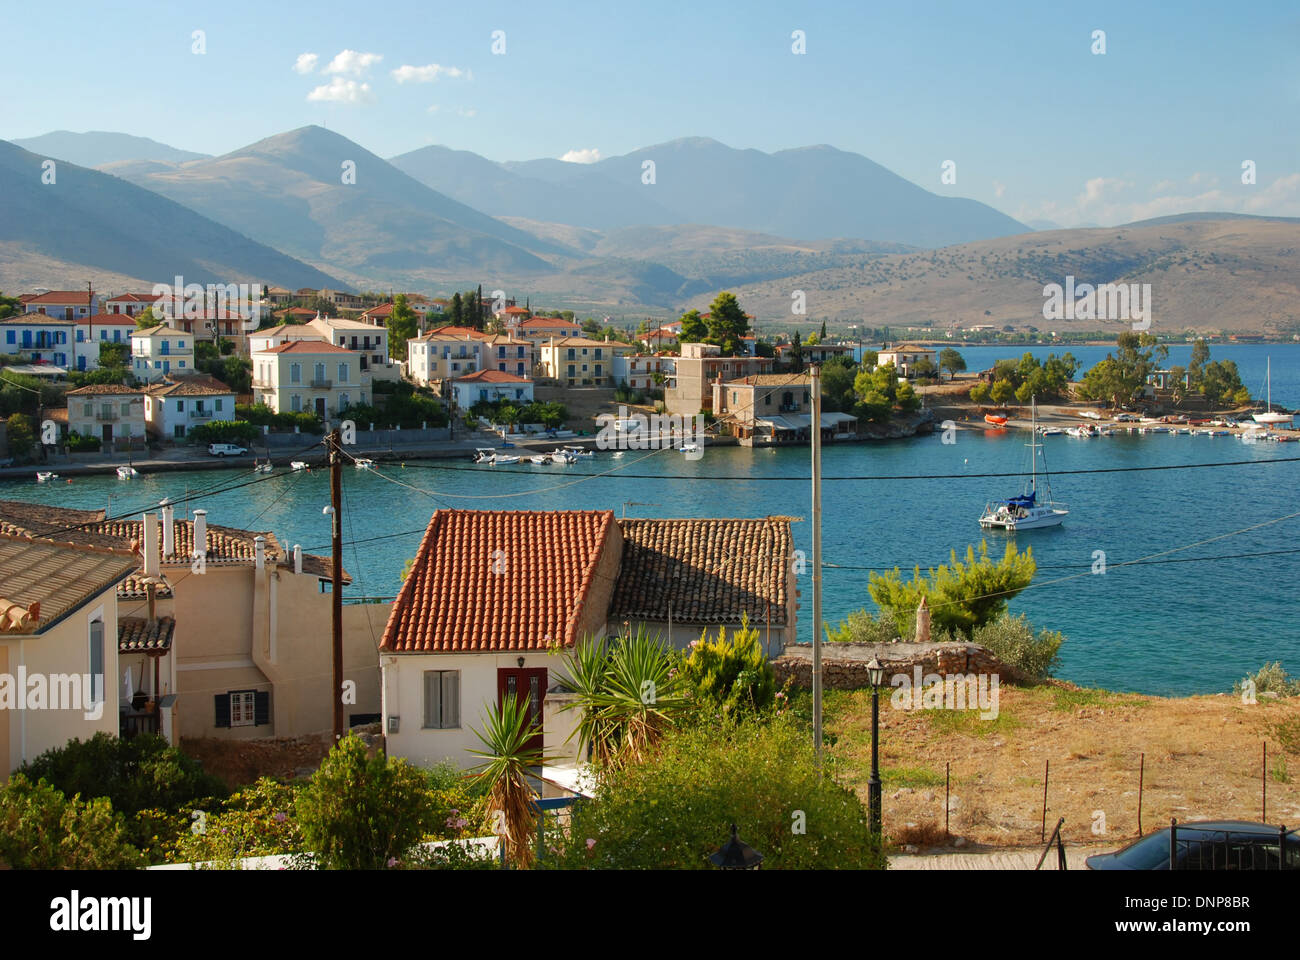 View of the harbour in Galaxidi, Greece, with the mountainous landscape behind Stock Photo